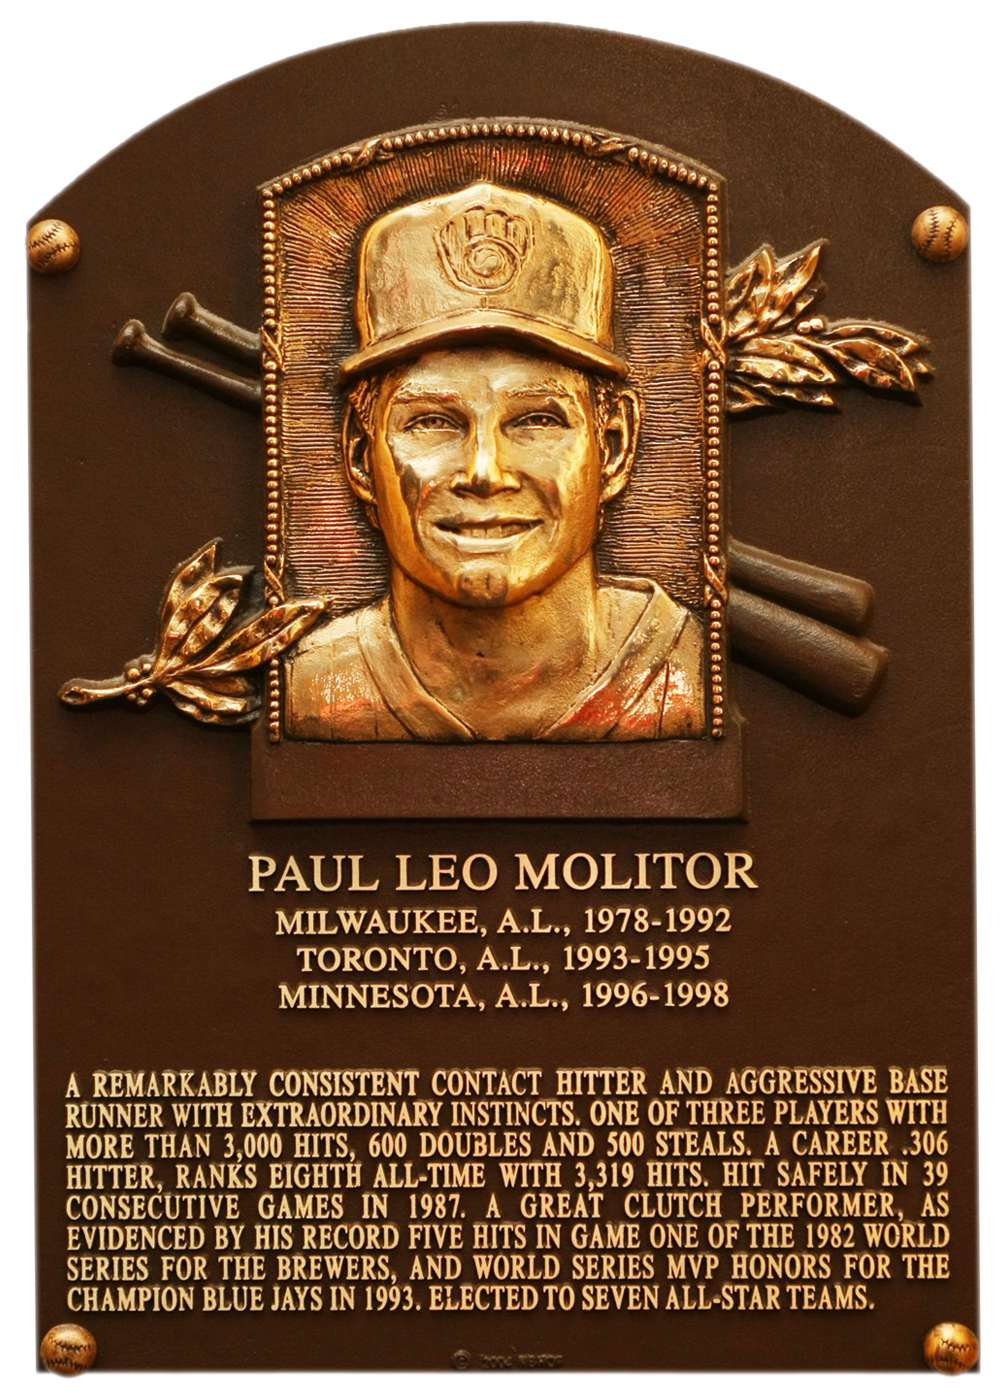 Paul Molitor Hall of Fame plaque